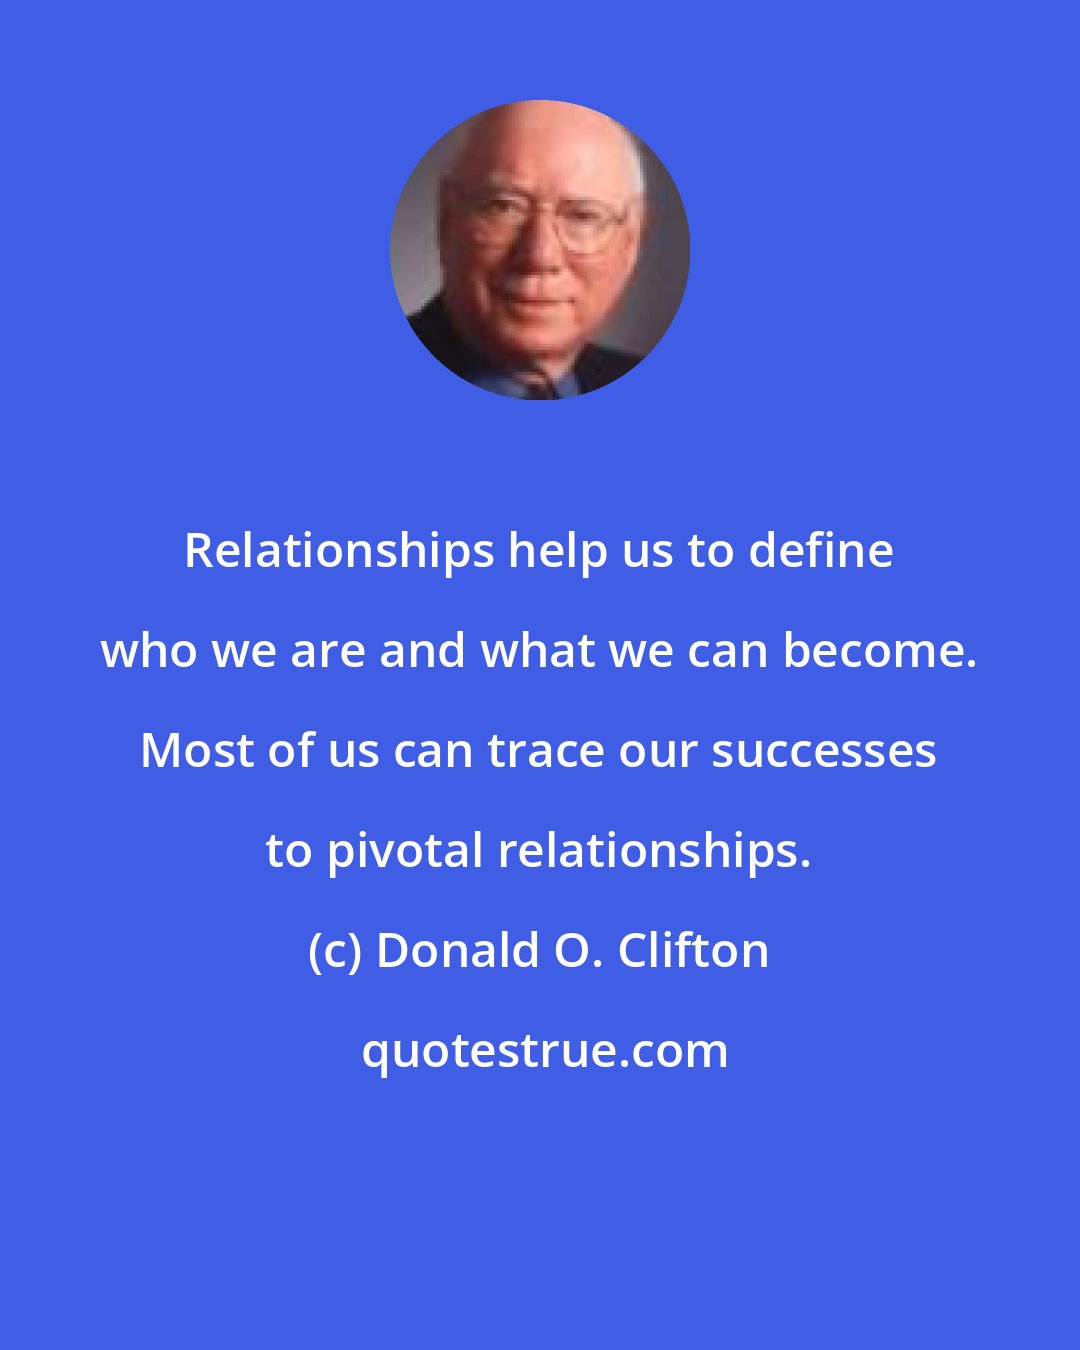 Donald O. Clifton: Relationships help us to define who we are and what we can become. Most of us can trace our successes to pivotal relationships.